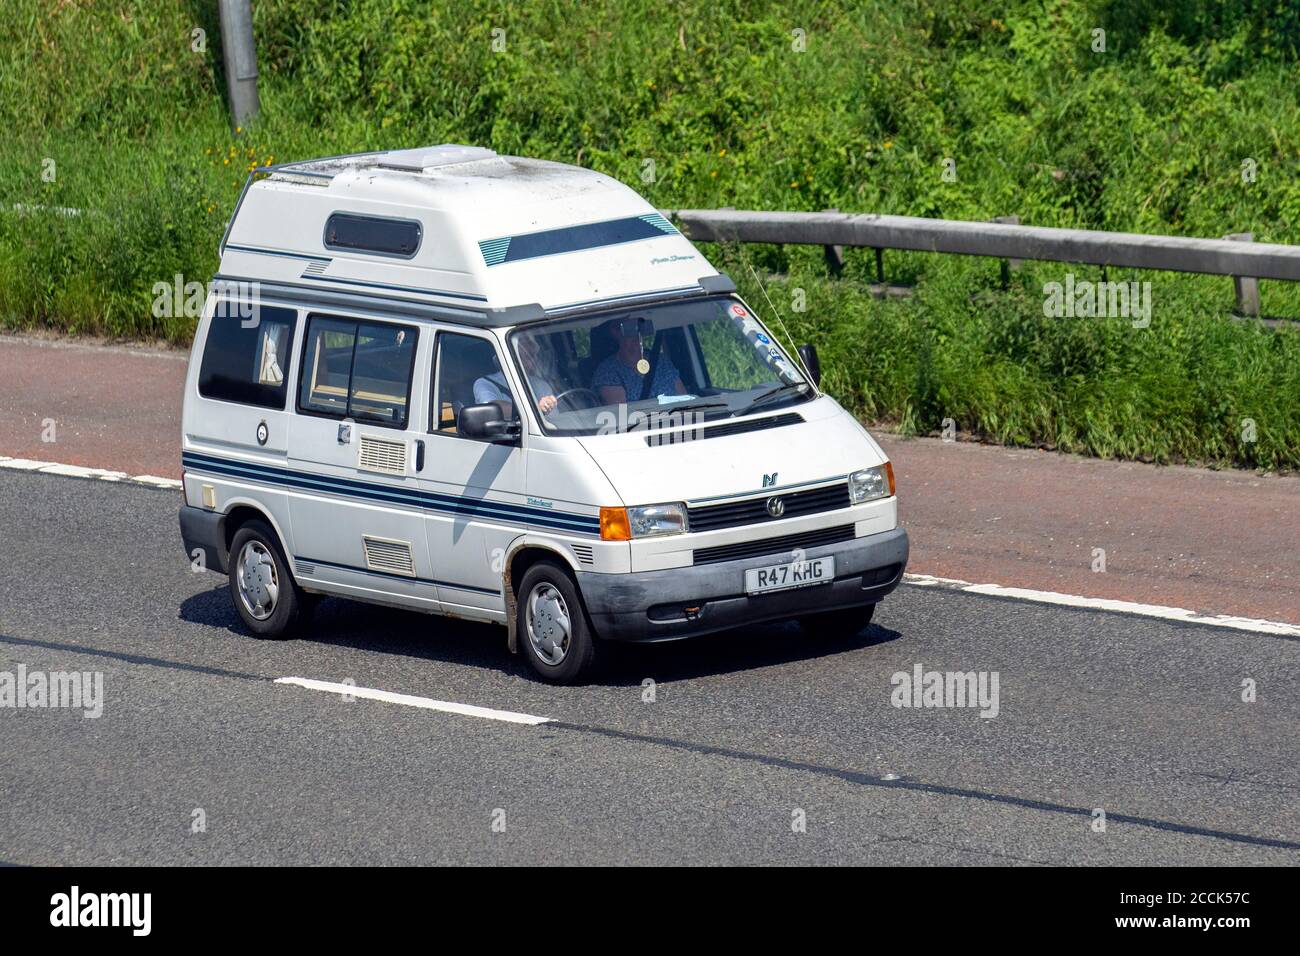 1998 90s nineties Trident white grey VW Volkswagen Transporter TD SWB Caravans and Motorhomes, campervans on Britain's roads, RV leisure vehicle, family holidays, caravanette vacations, Touring caravan holiday, van conversions, Vanagon autohome, life on the road, Stock Photo